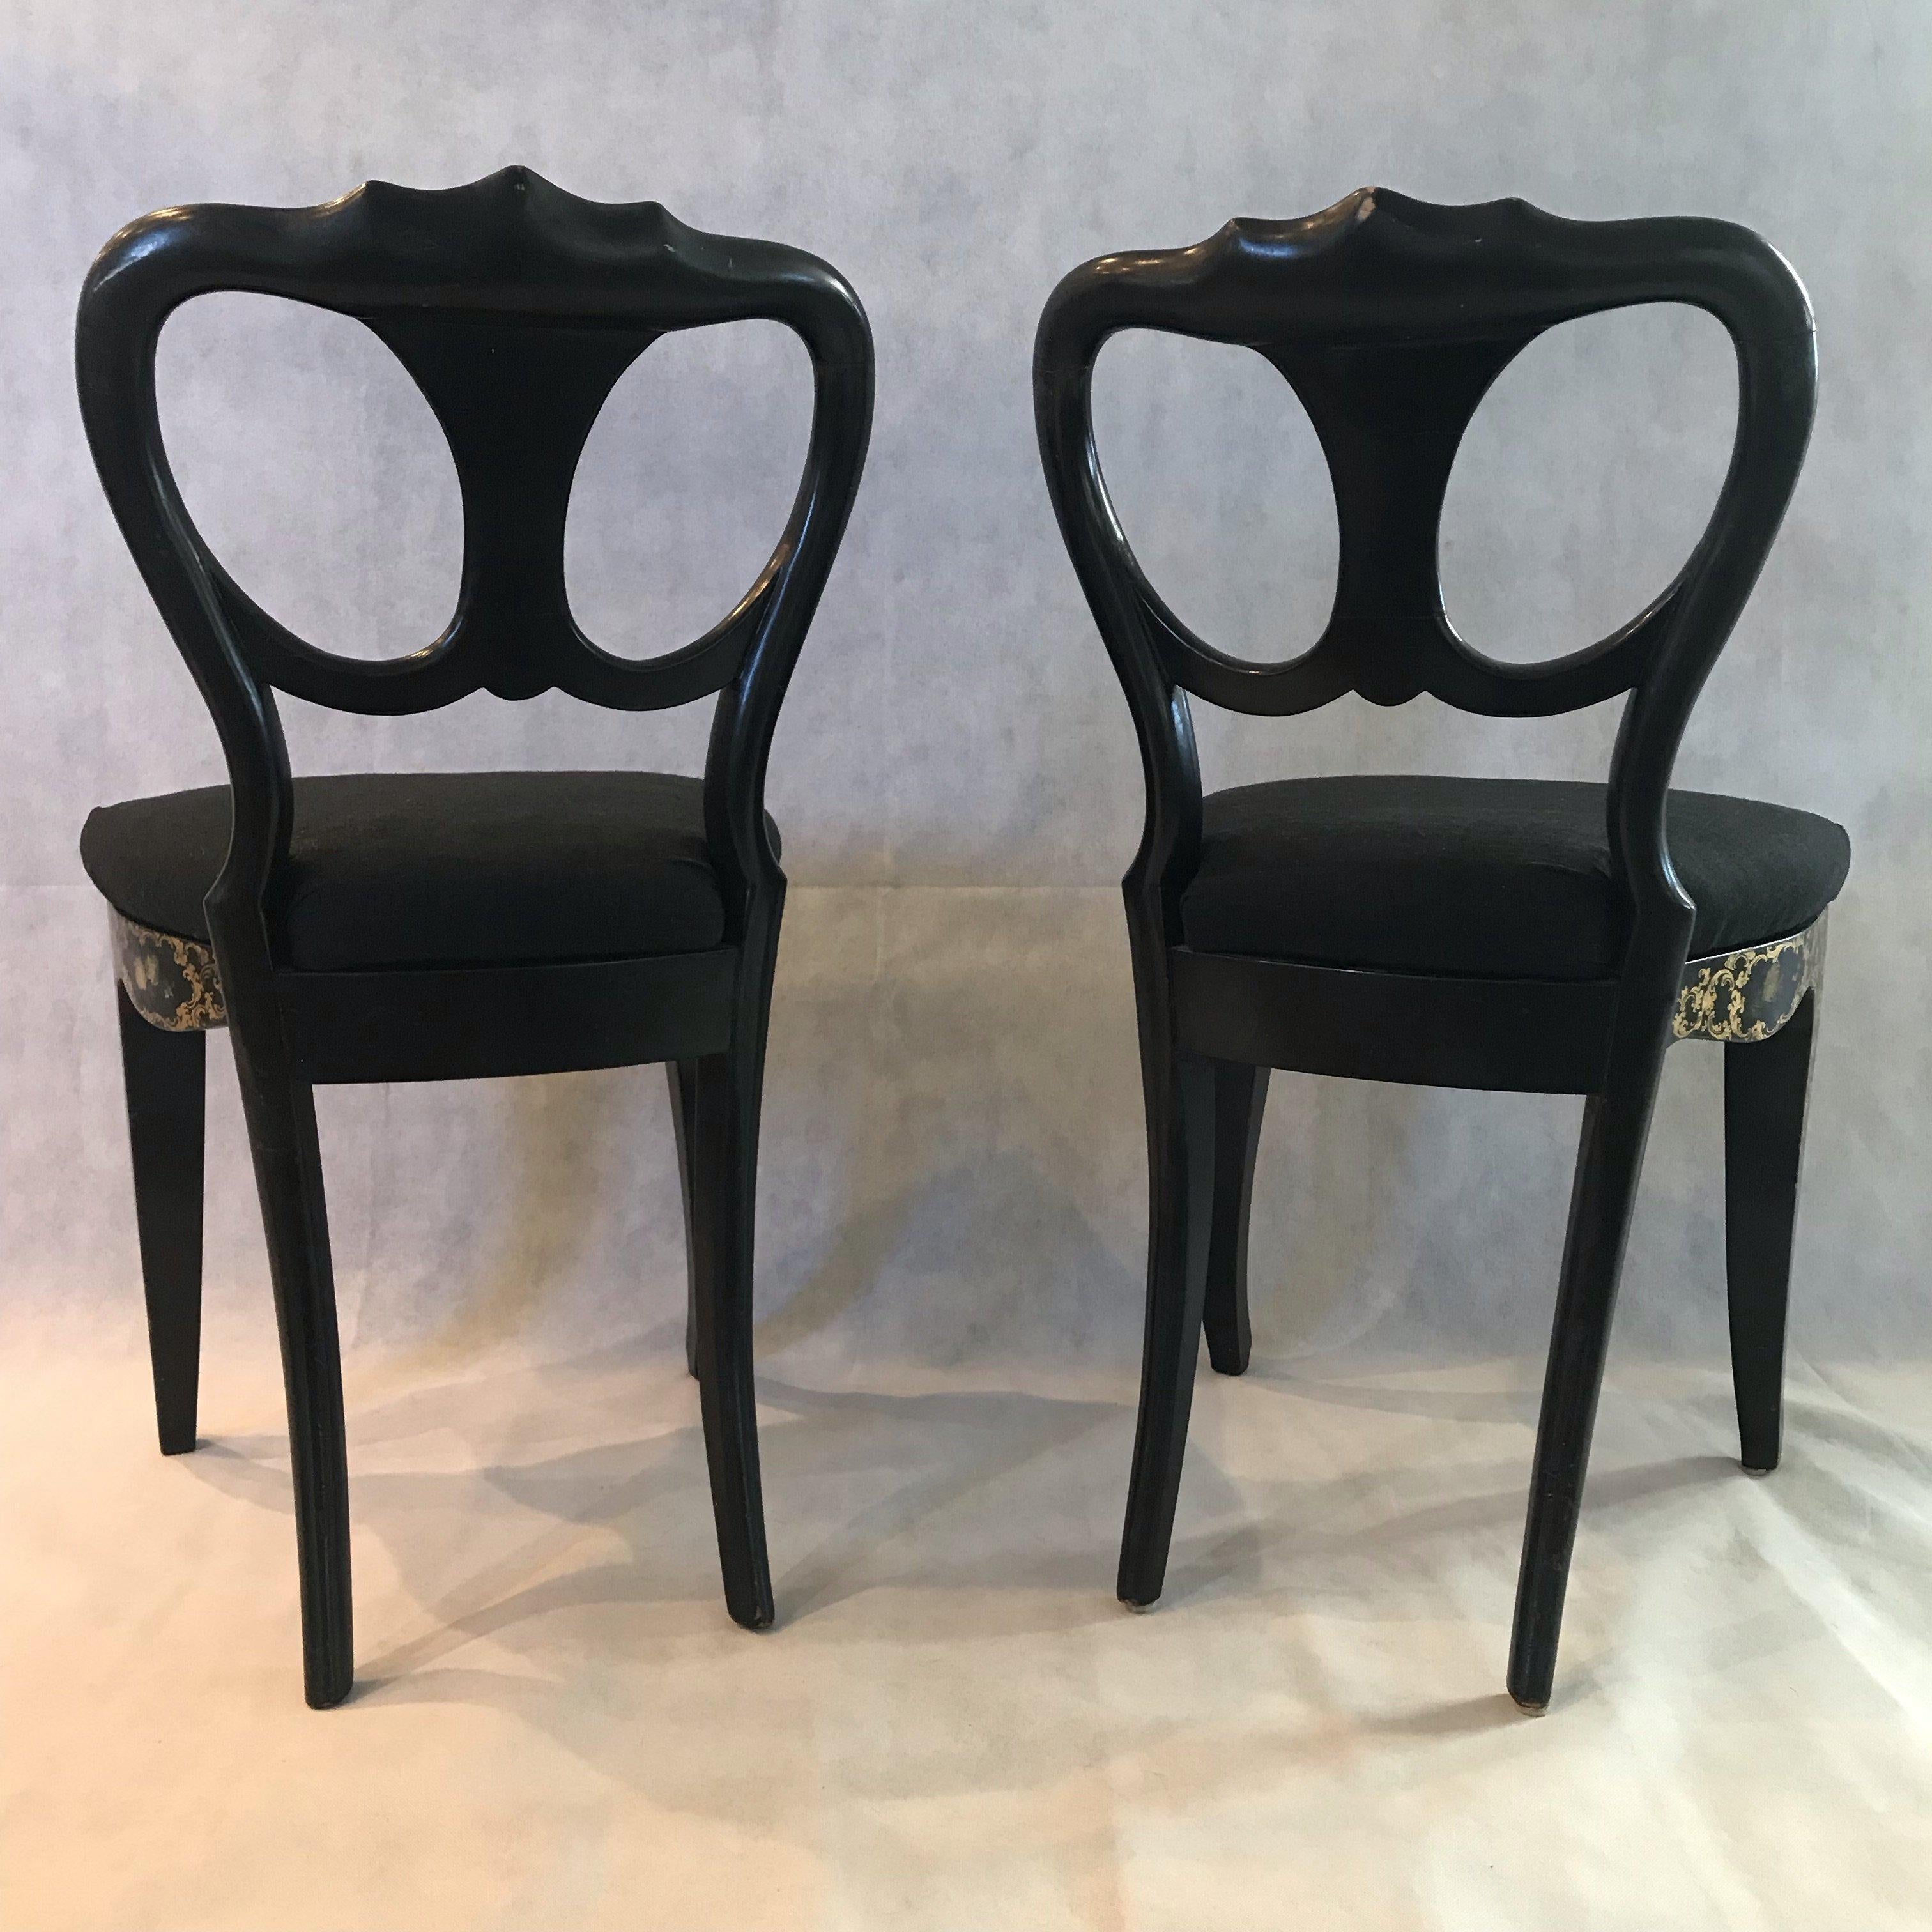 Ebonized Exquisite Pair of French Hand Painted Ebony 19th Century Chairs